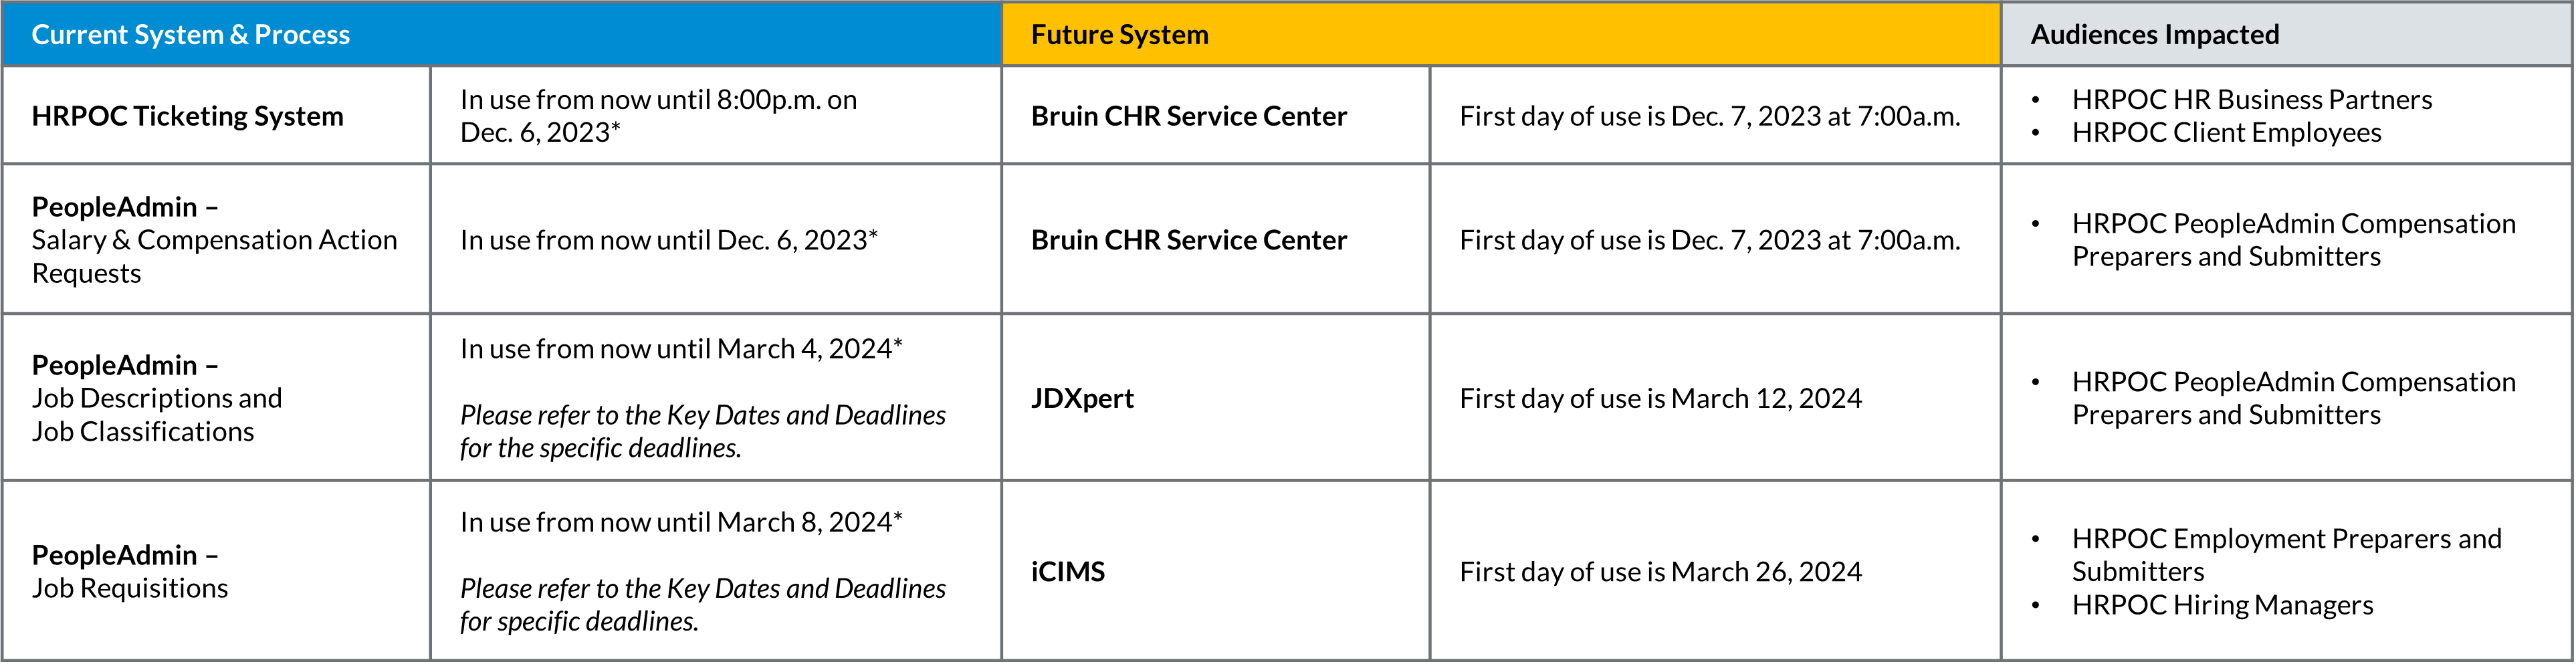 Image of HR IT Systems & go-live dates for HRPOC clients table